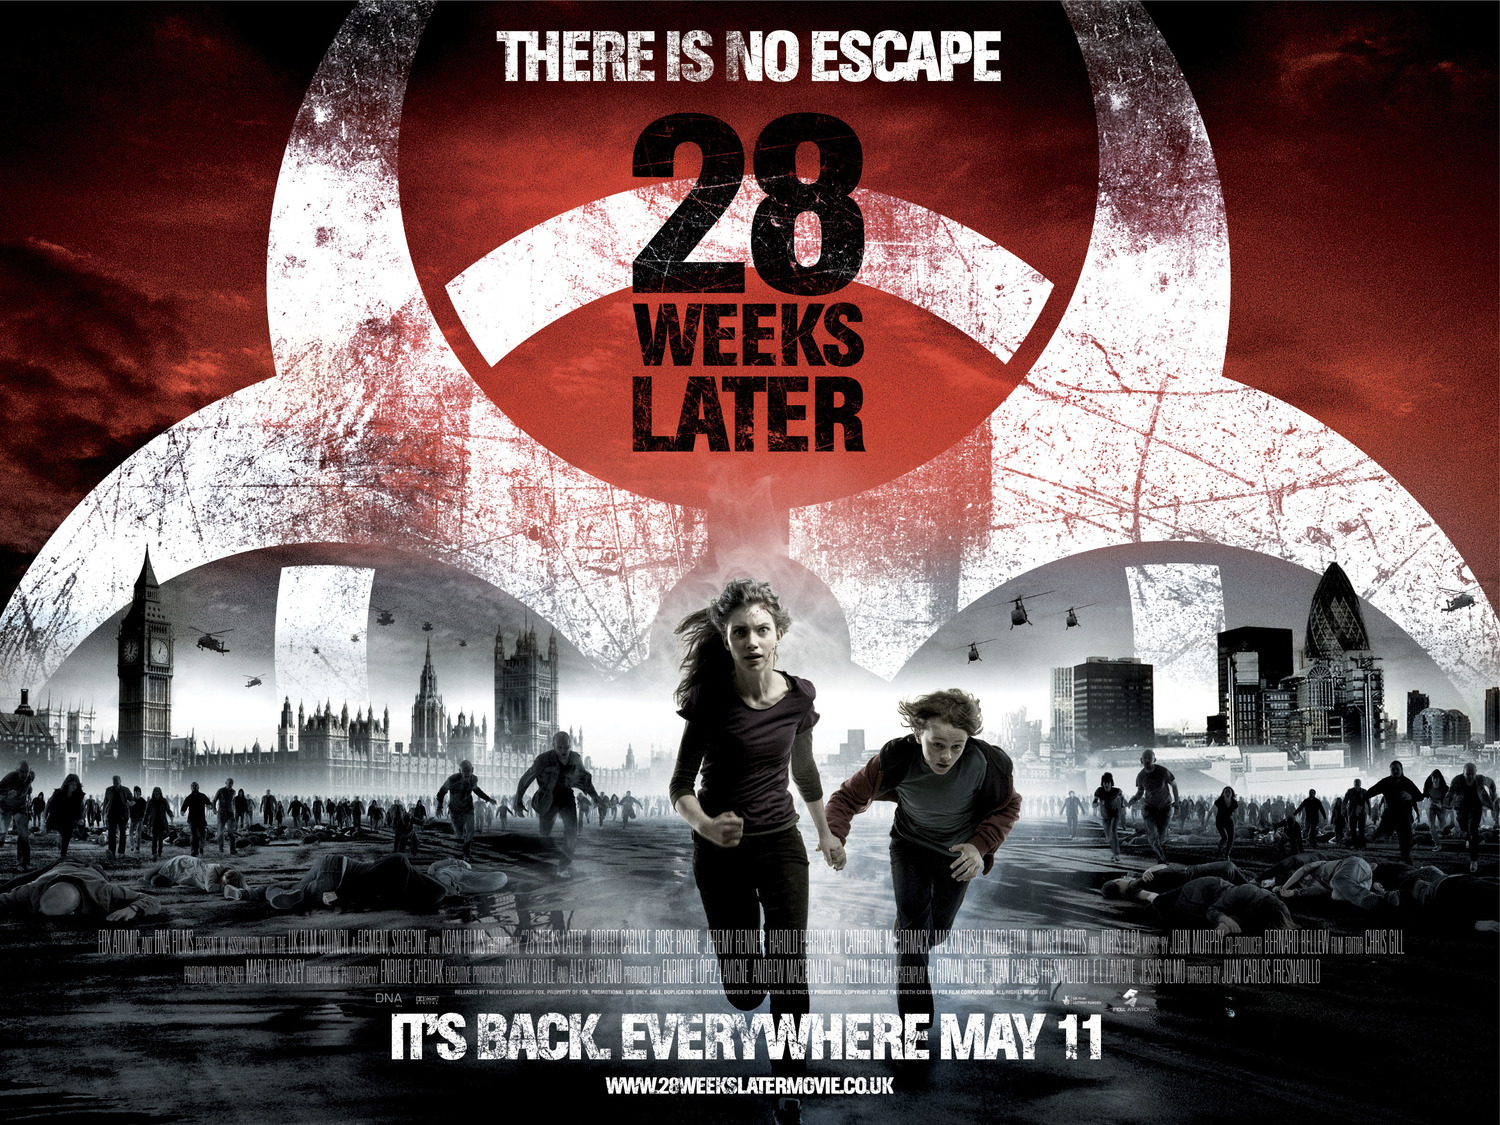 Extra Large Movie Poster Image for 28 Weeks Later (#5 of 5)